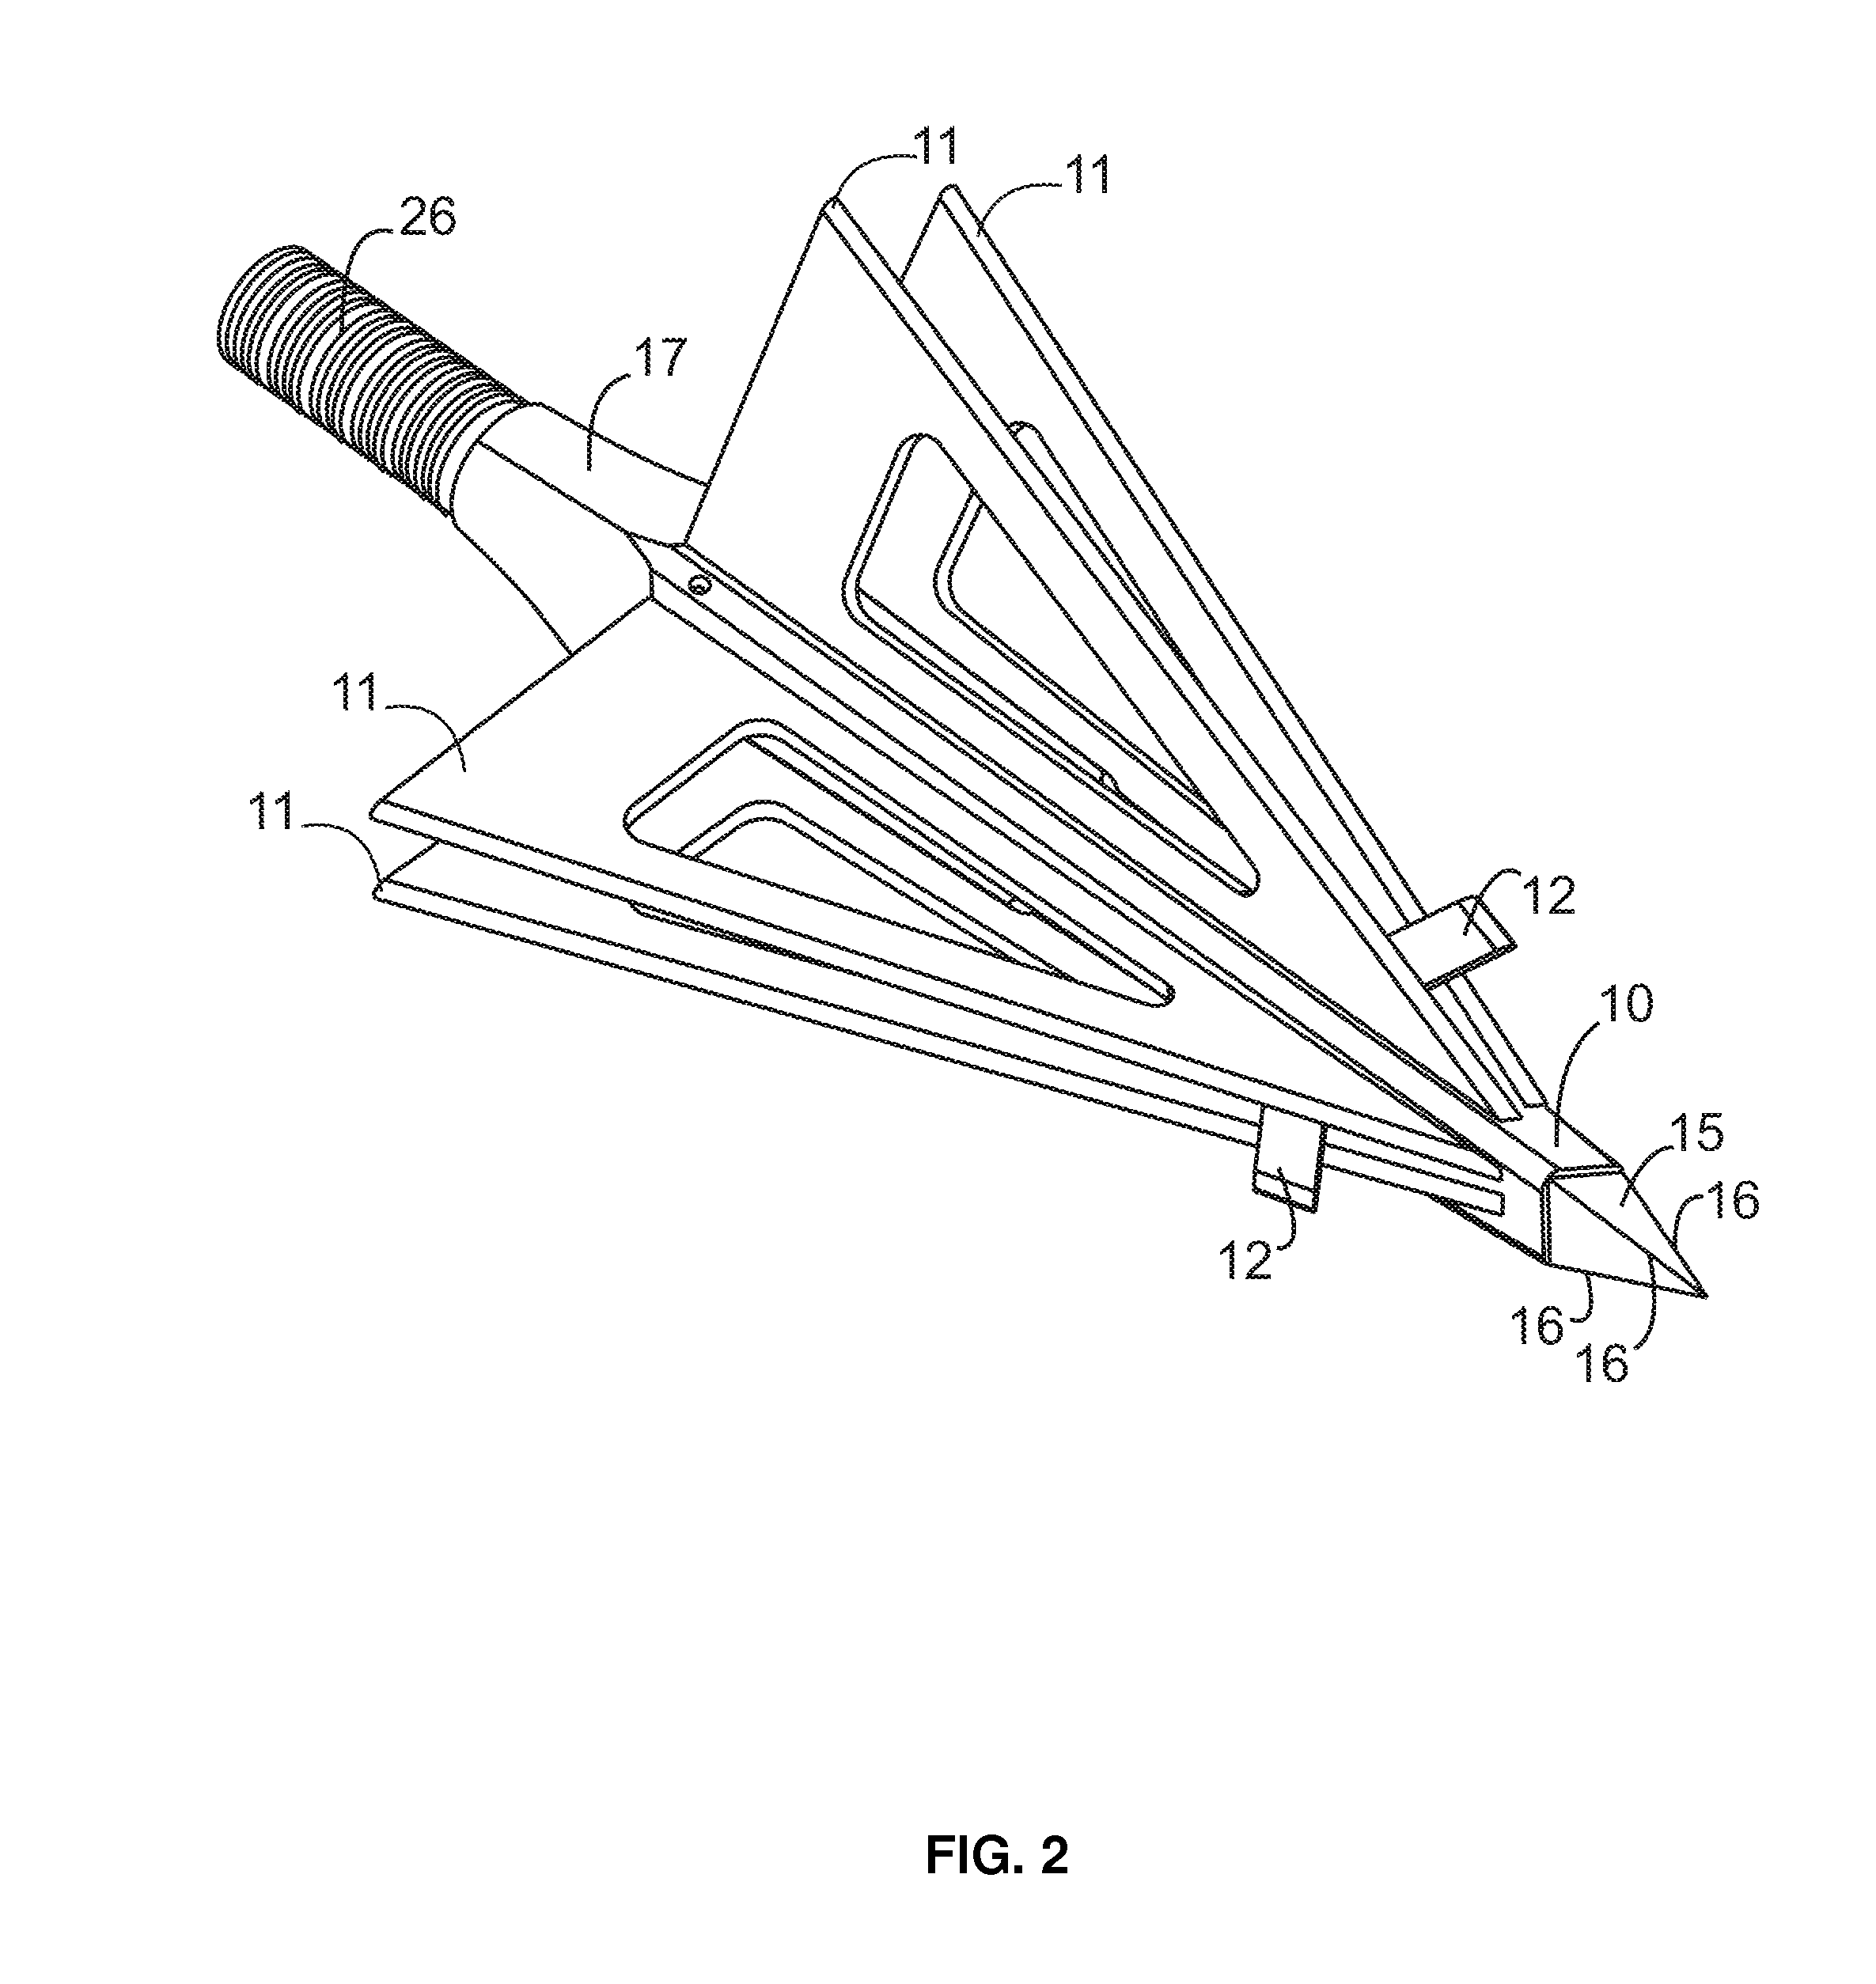 Hunting arrowhead having fixed and expandable blades